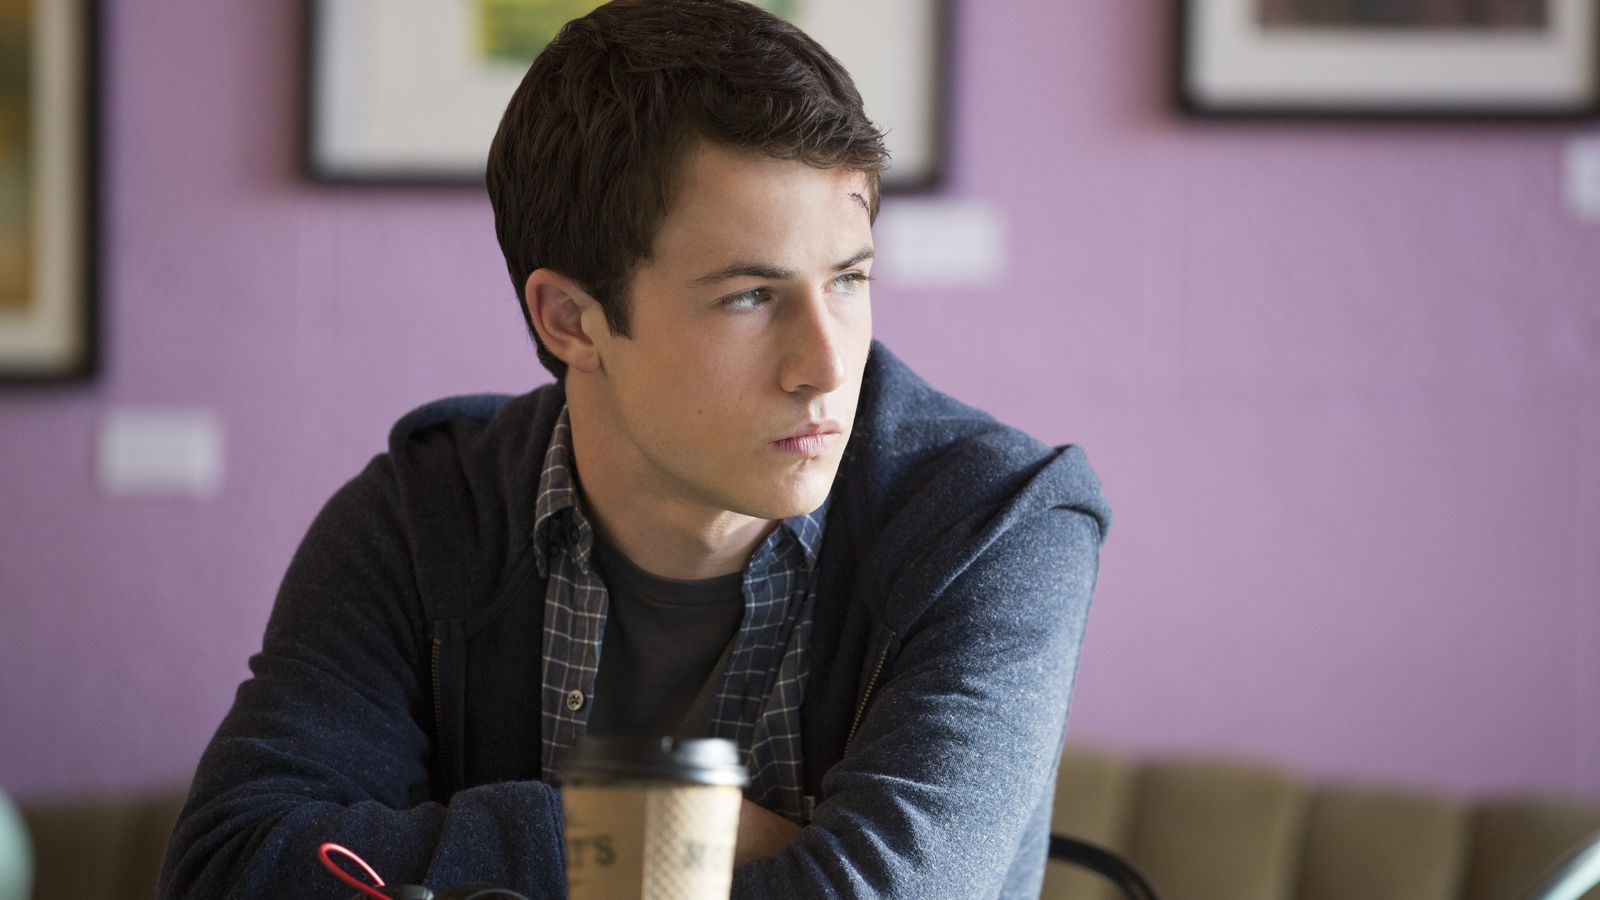 Dylan Minnette's Blue Hair in 13 Reasons Why - wide 7